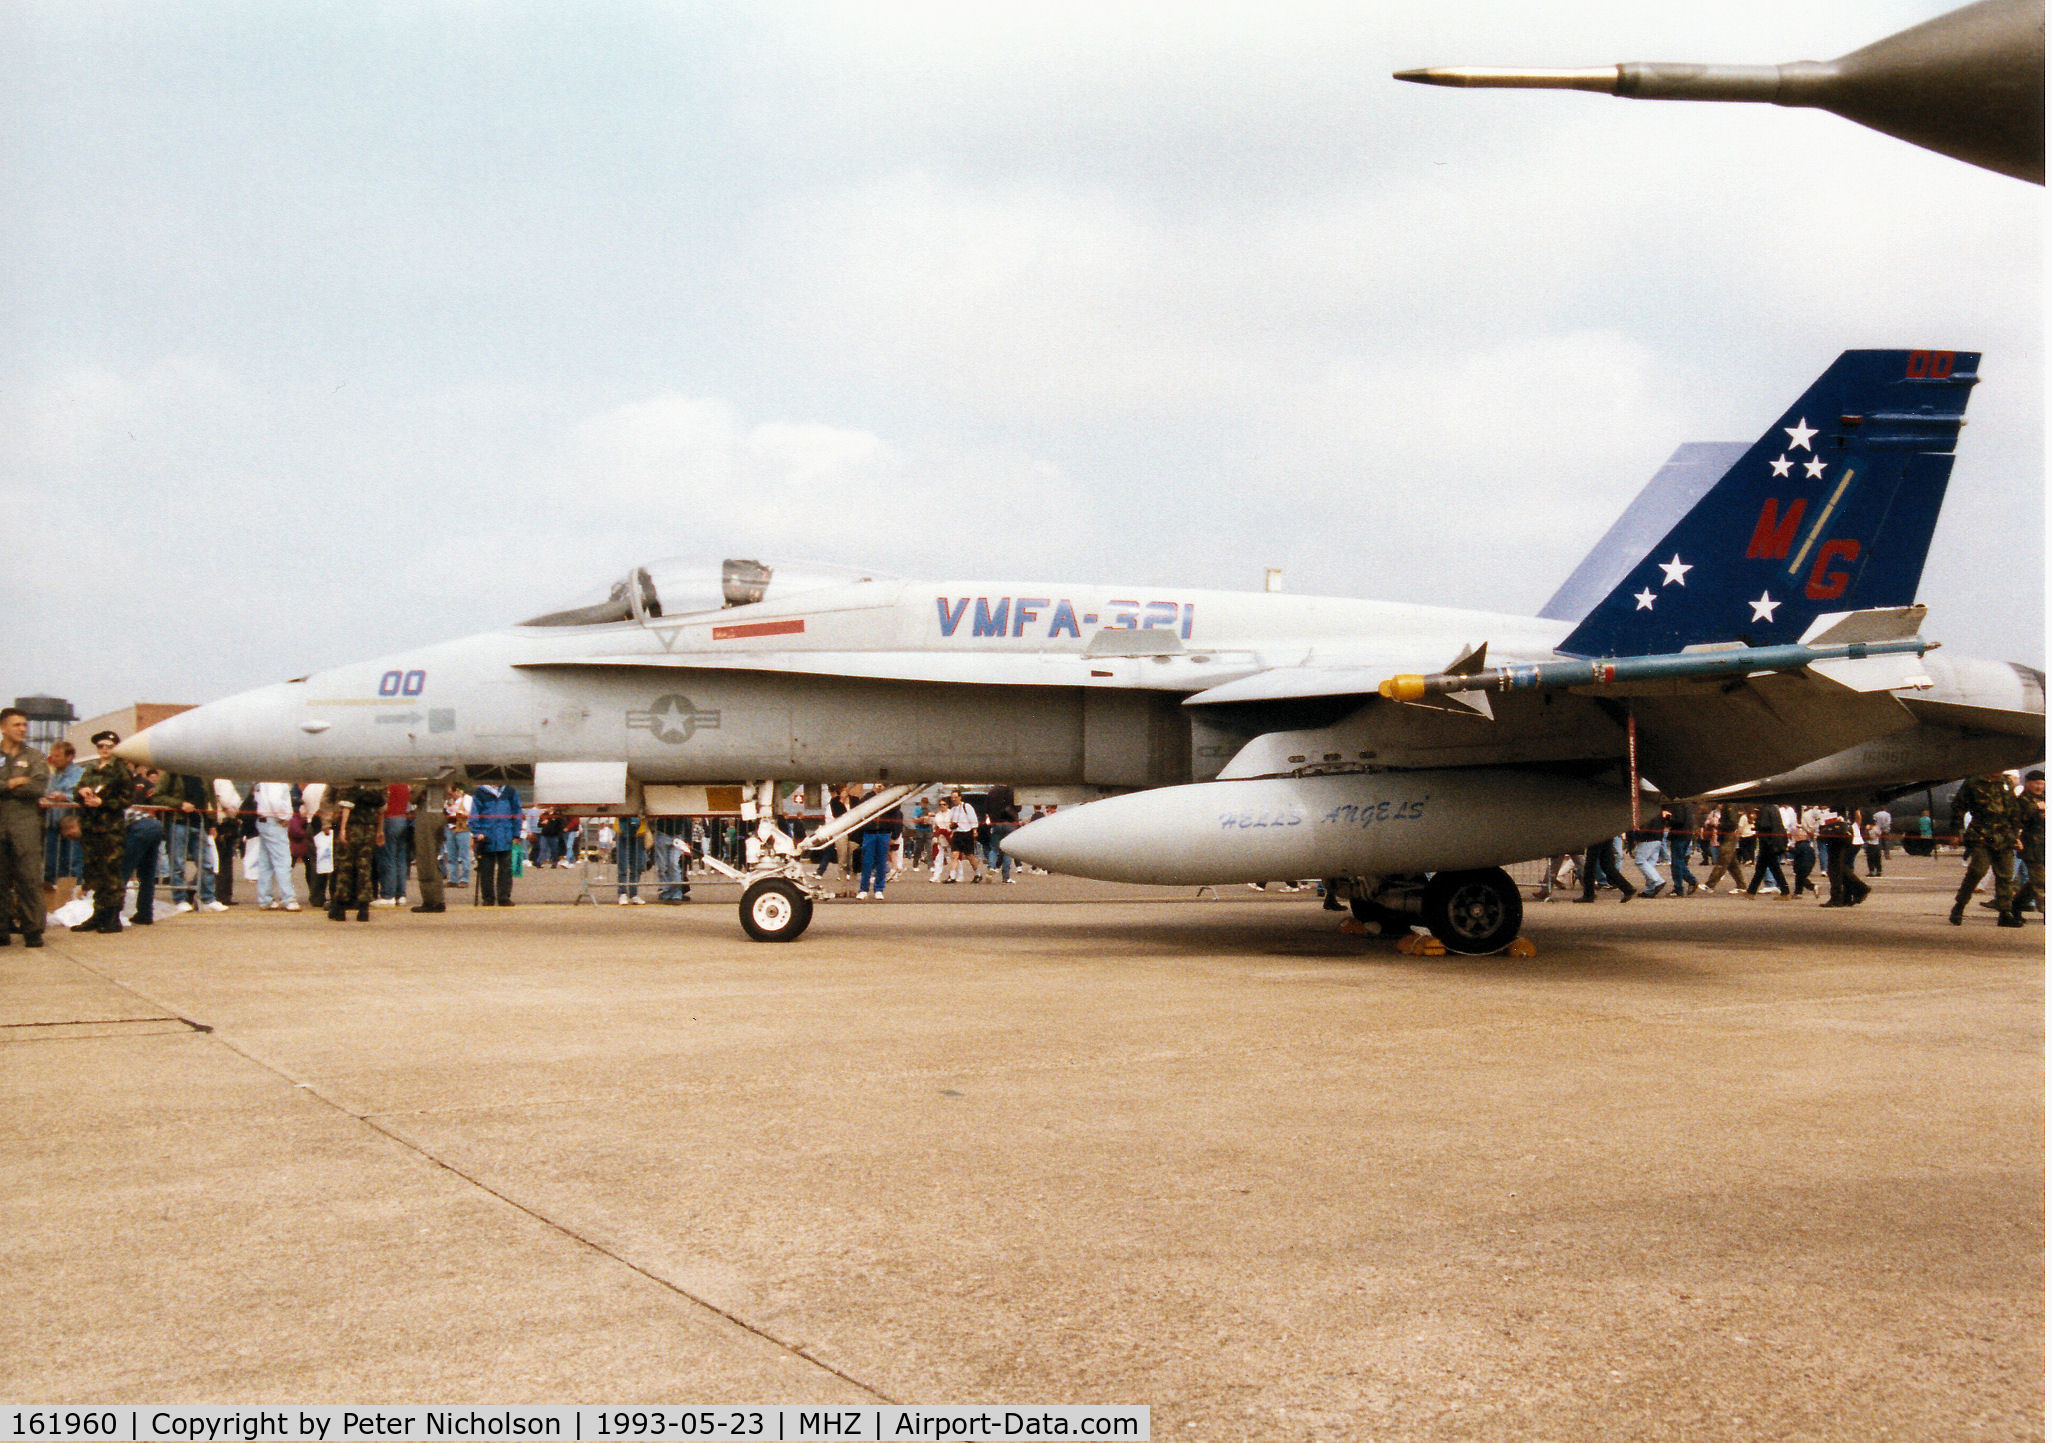 161960, McDonnell Douglas F/A-18A Hornet C/N 0172/A134, F/A-18A Hornet of Marine Fighter Attack Squadron VMFA-321 on display at the 1998 RAF Mildenhall Air Fete.